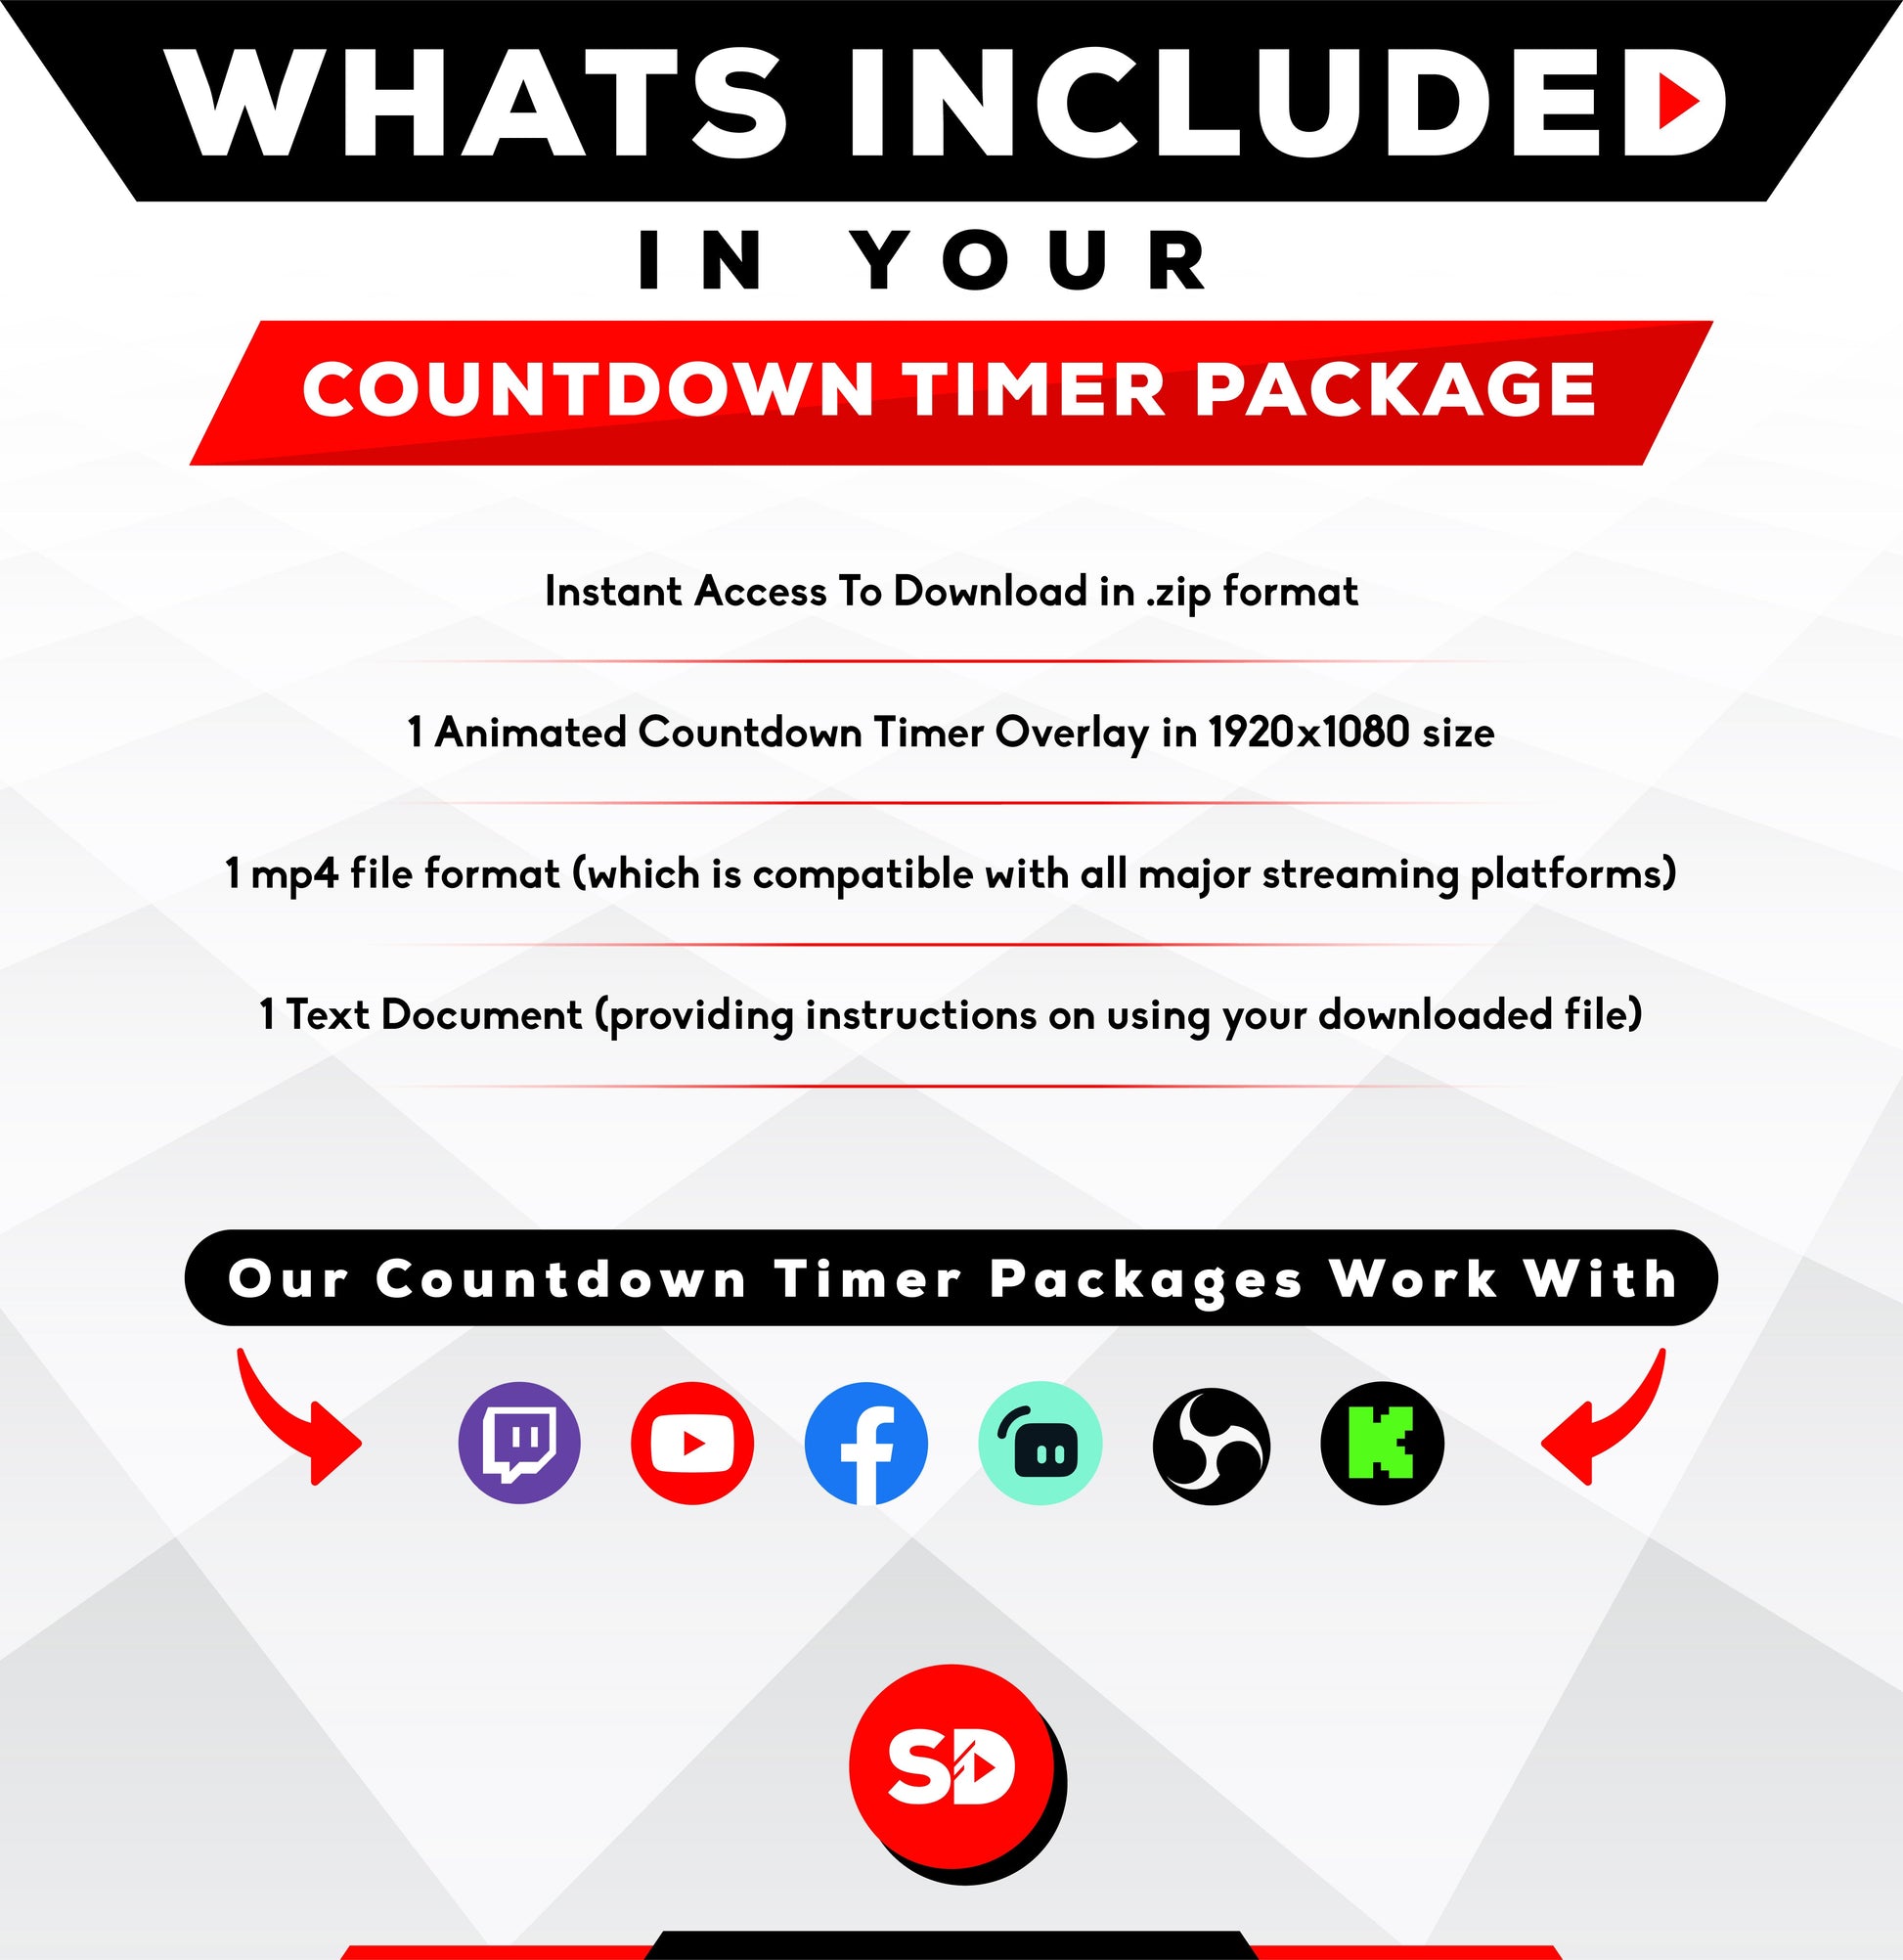 whats included in your package - countdown timer - legends - stream designz